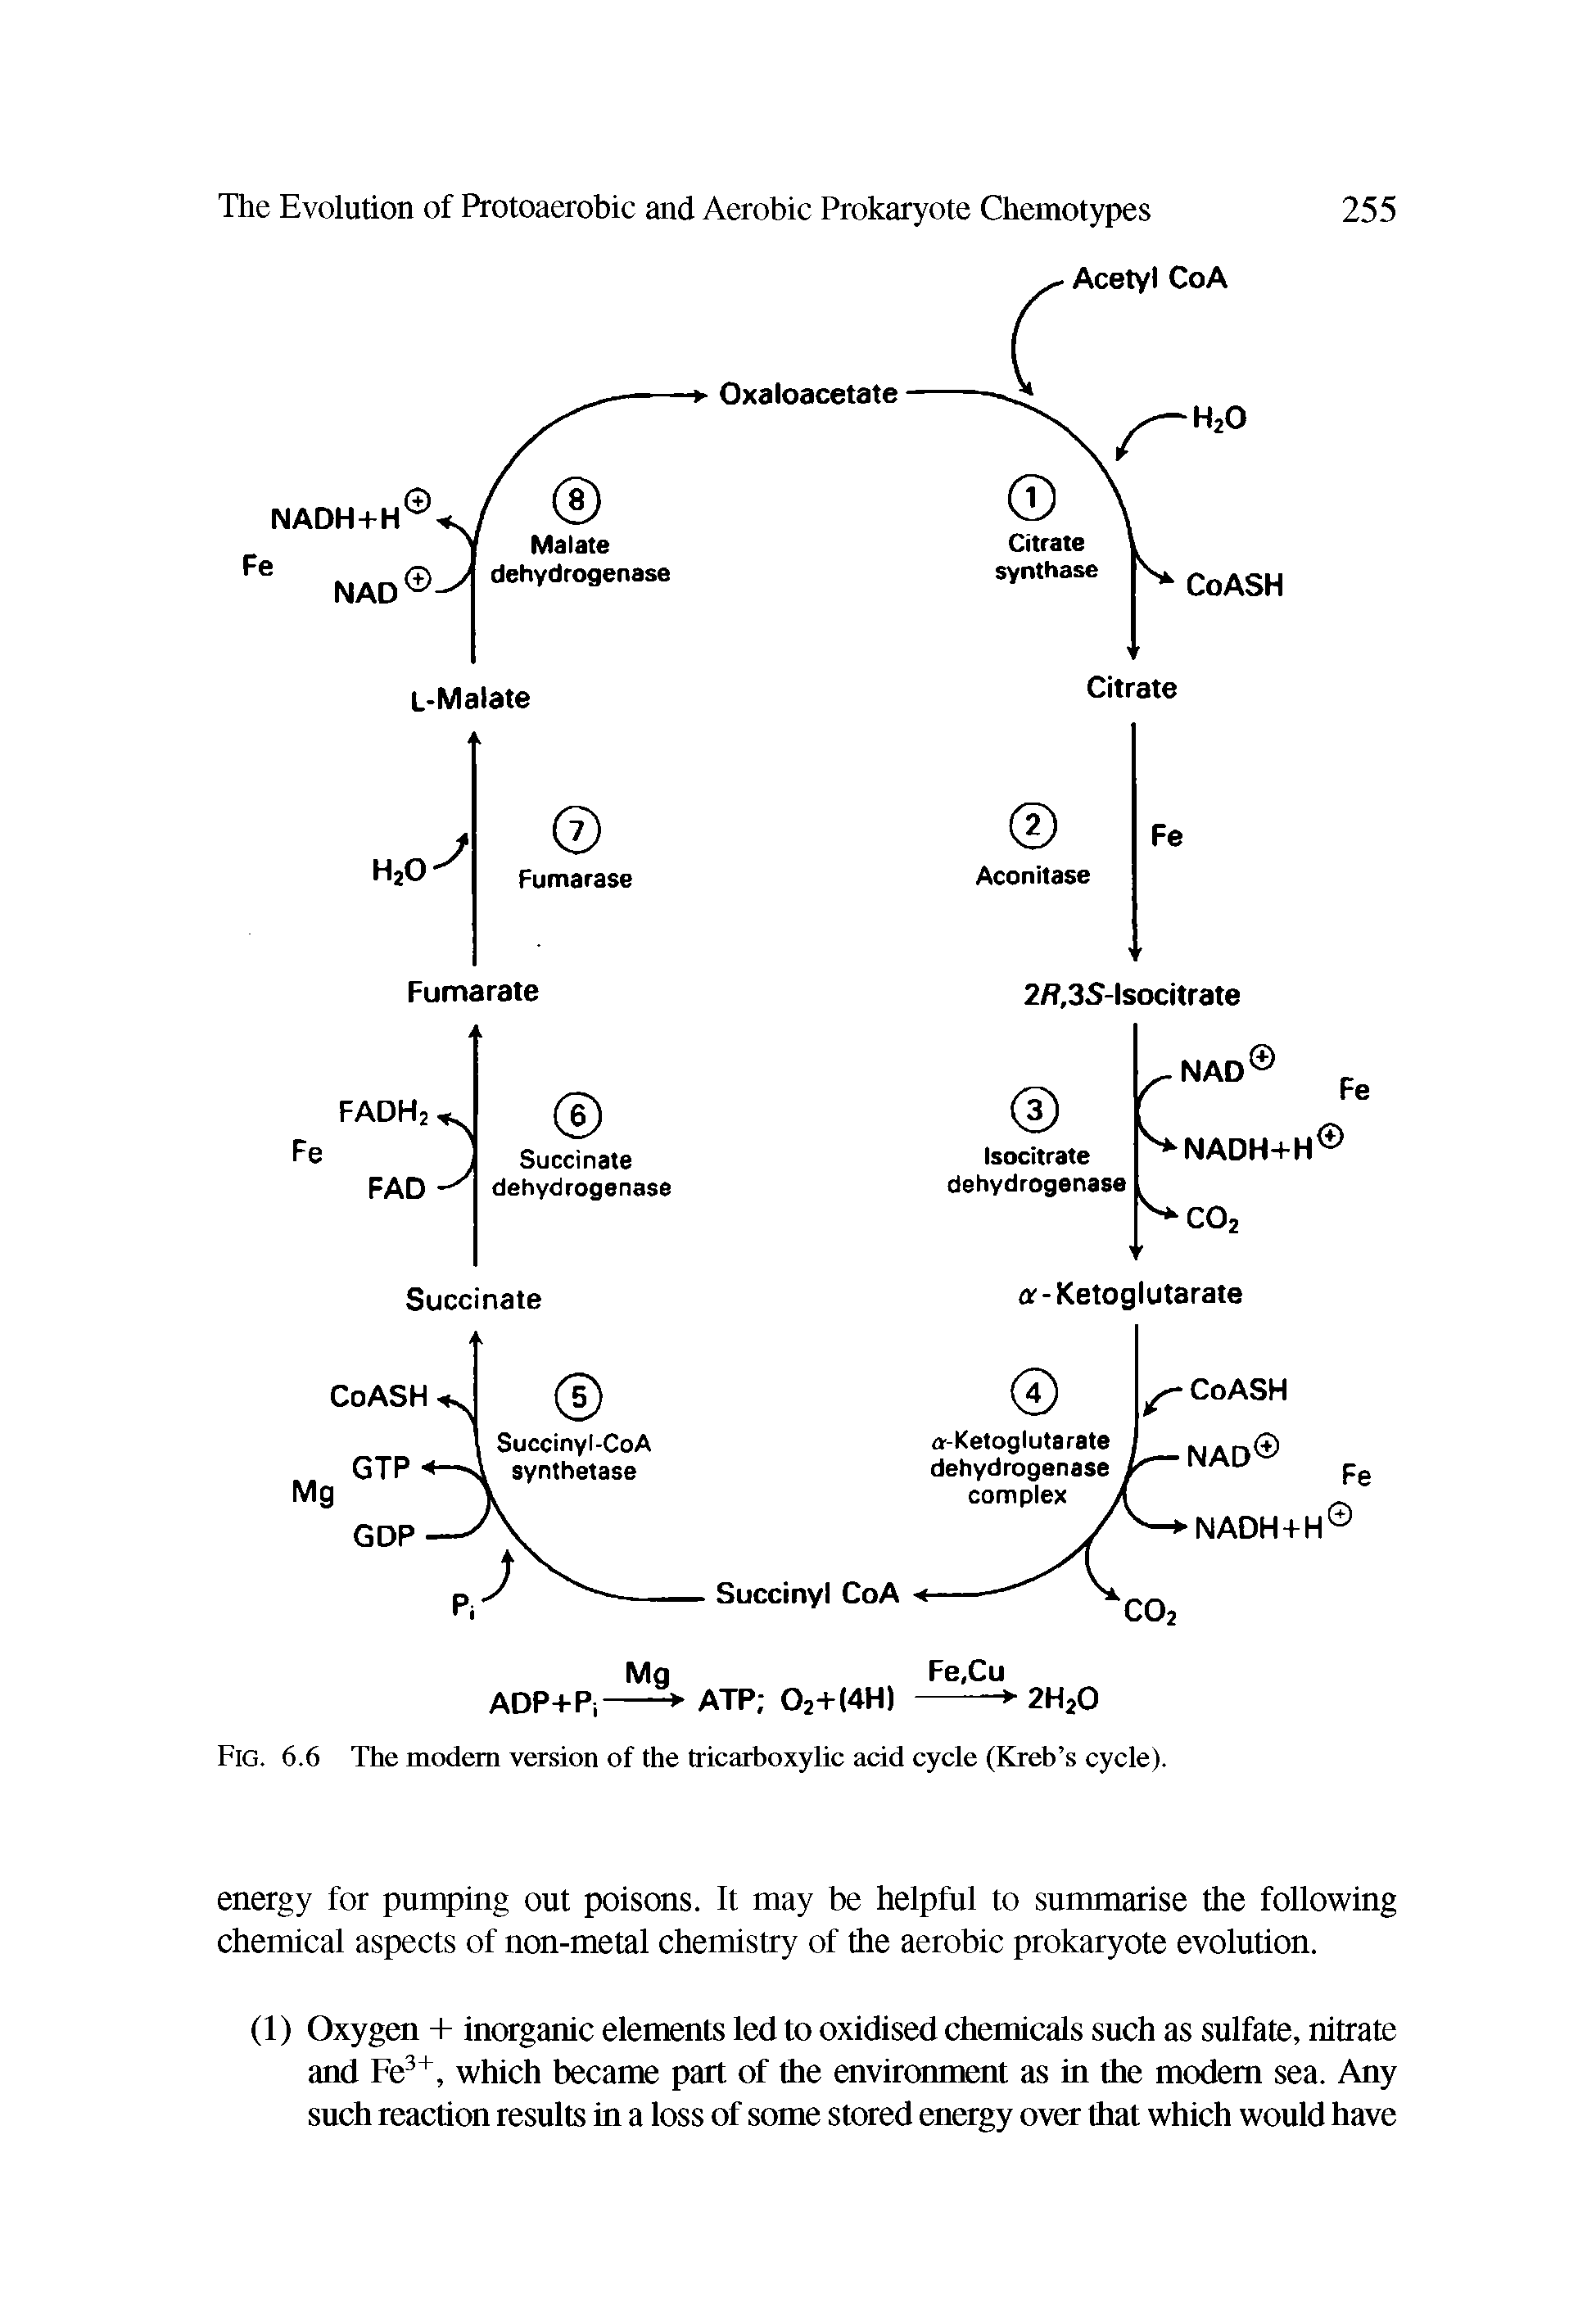 Fig. 6.6 The modem version of the tricarboxylic acid cycle (Kreb s cycle).